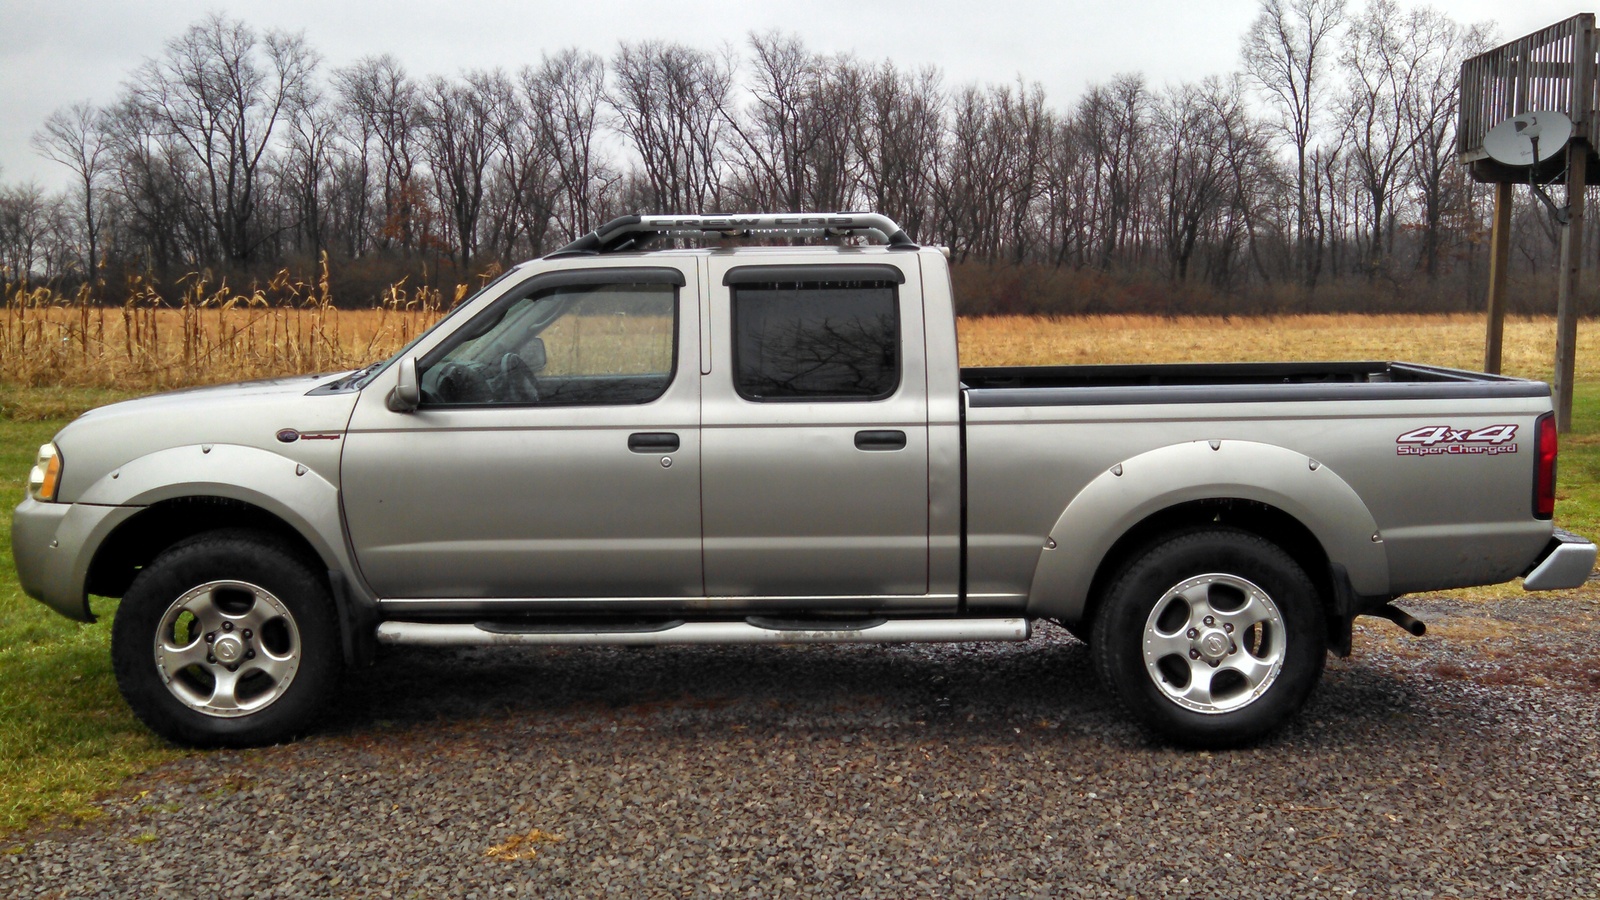 2002 Nissan frontier supercharged gas mileage #1